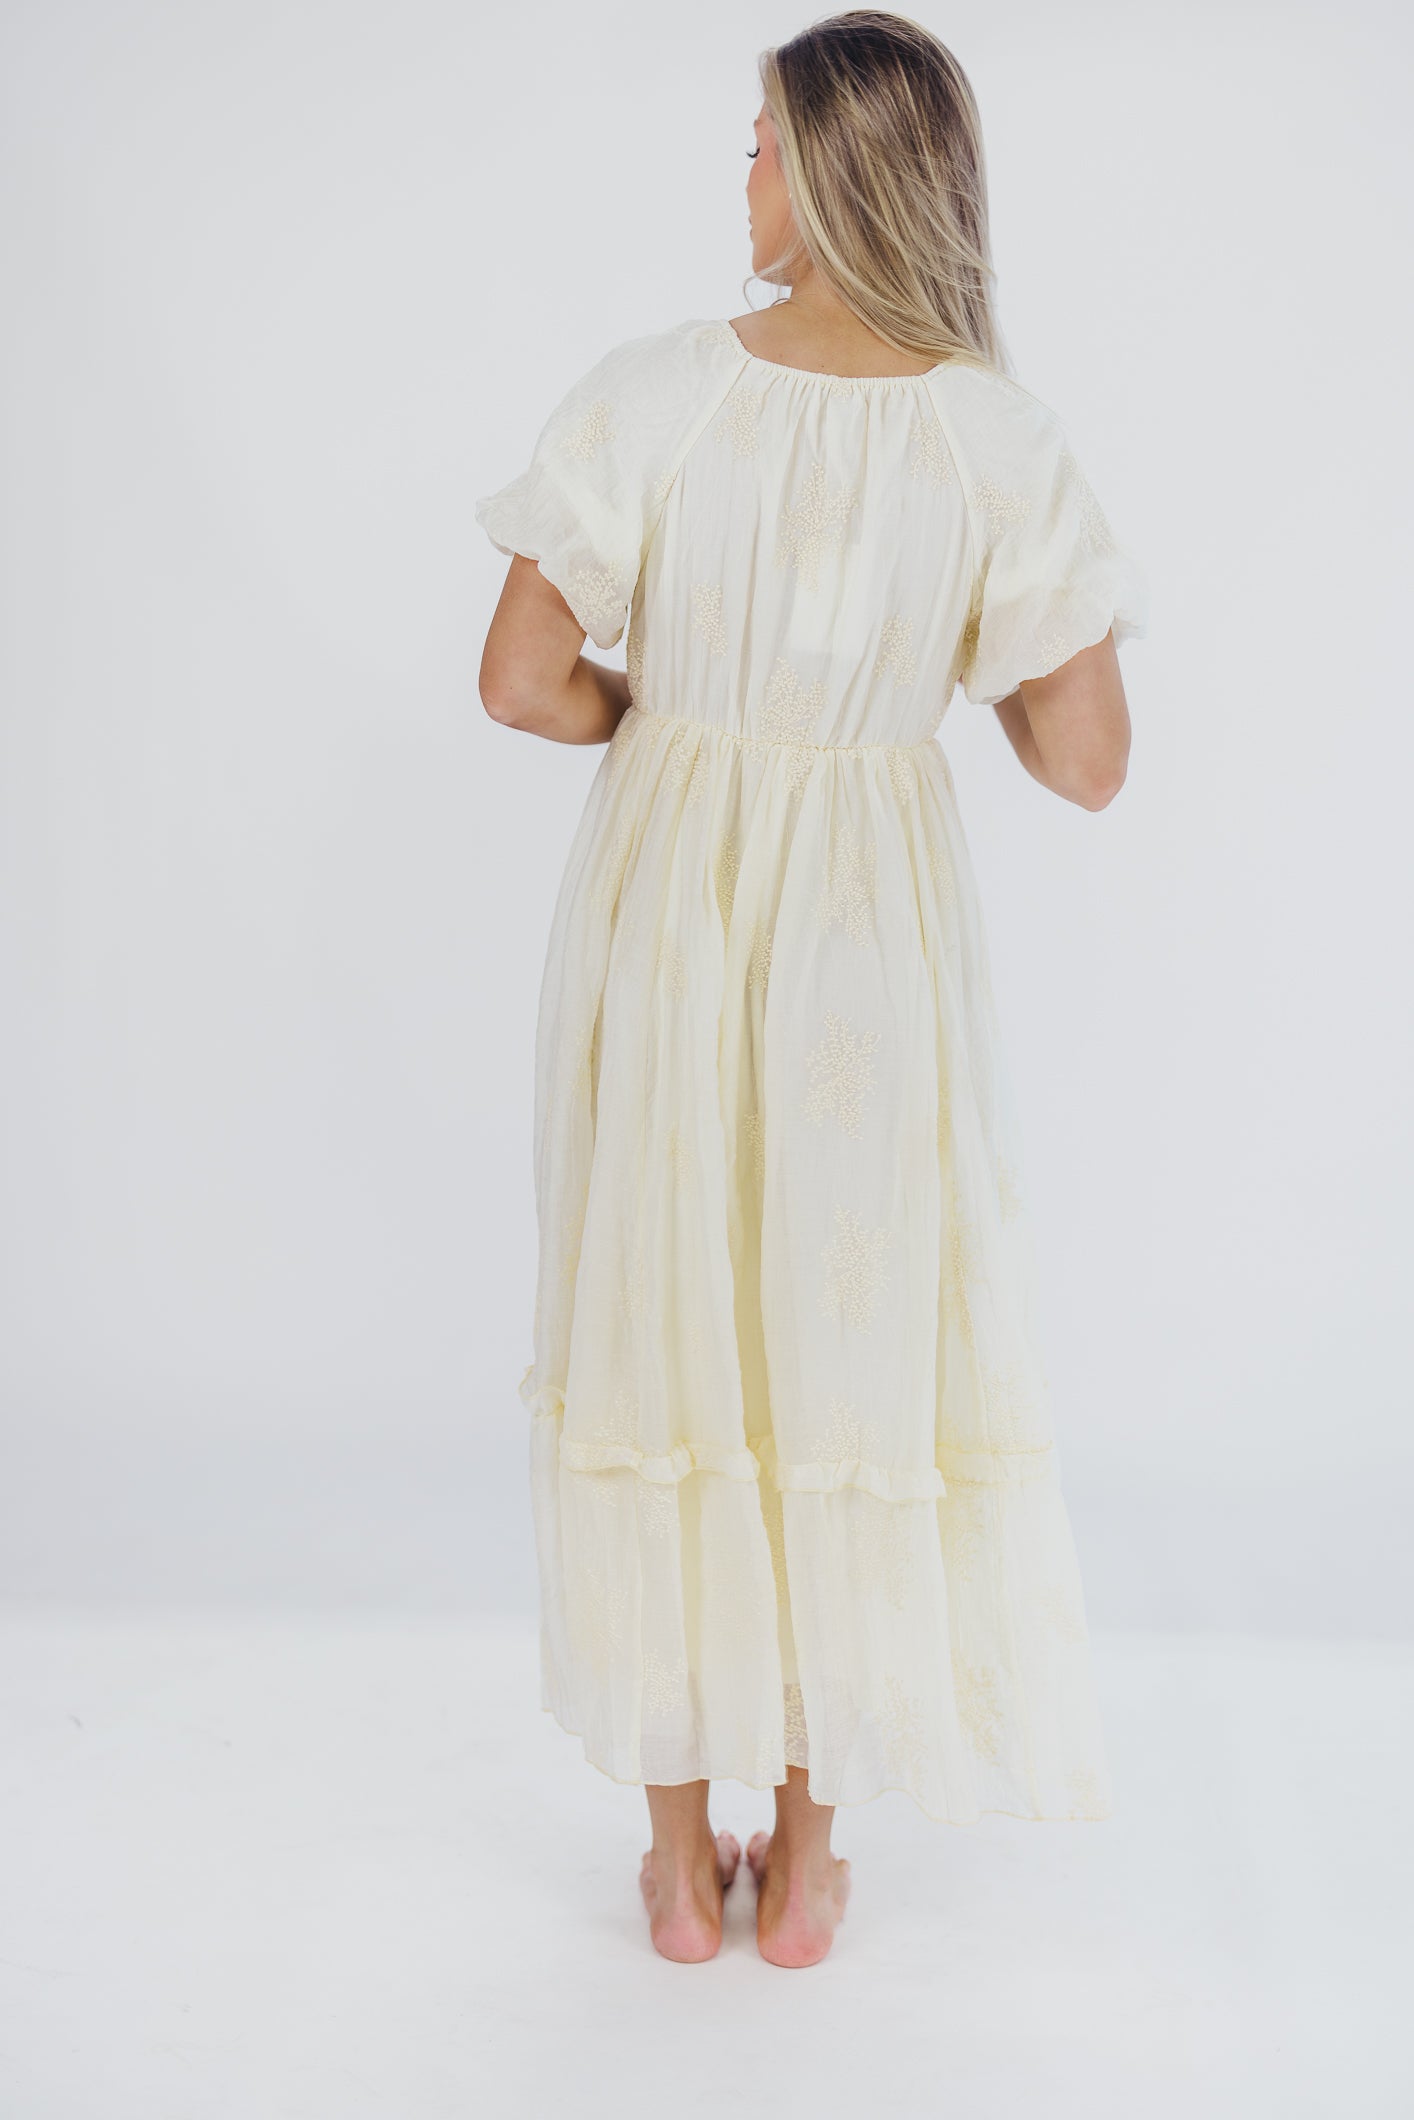 Hallie Embroidered Maxi Dress in Cream - Bump Friendly & Inclusive Sizing (S-3XL)